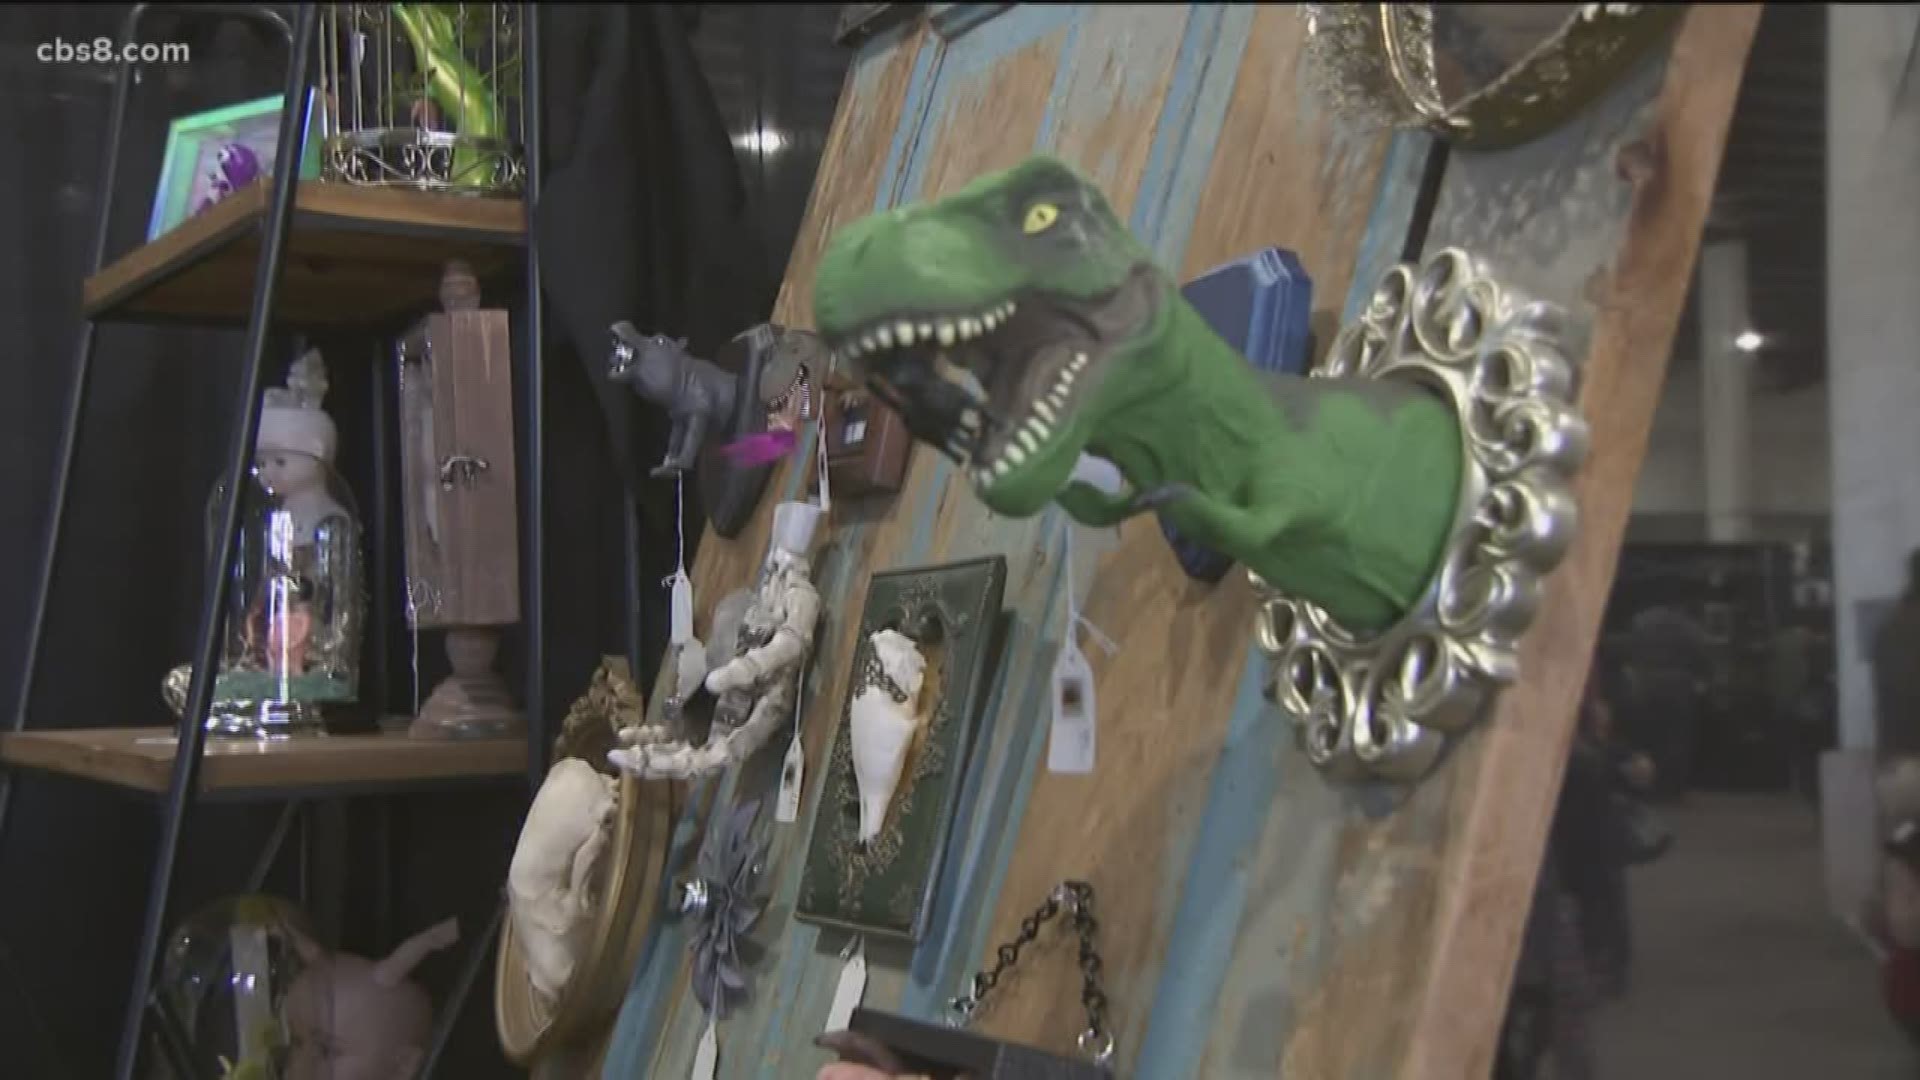 Oddities and Curiosities Expo wows visitors in Del Mar